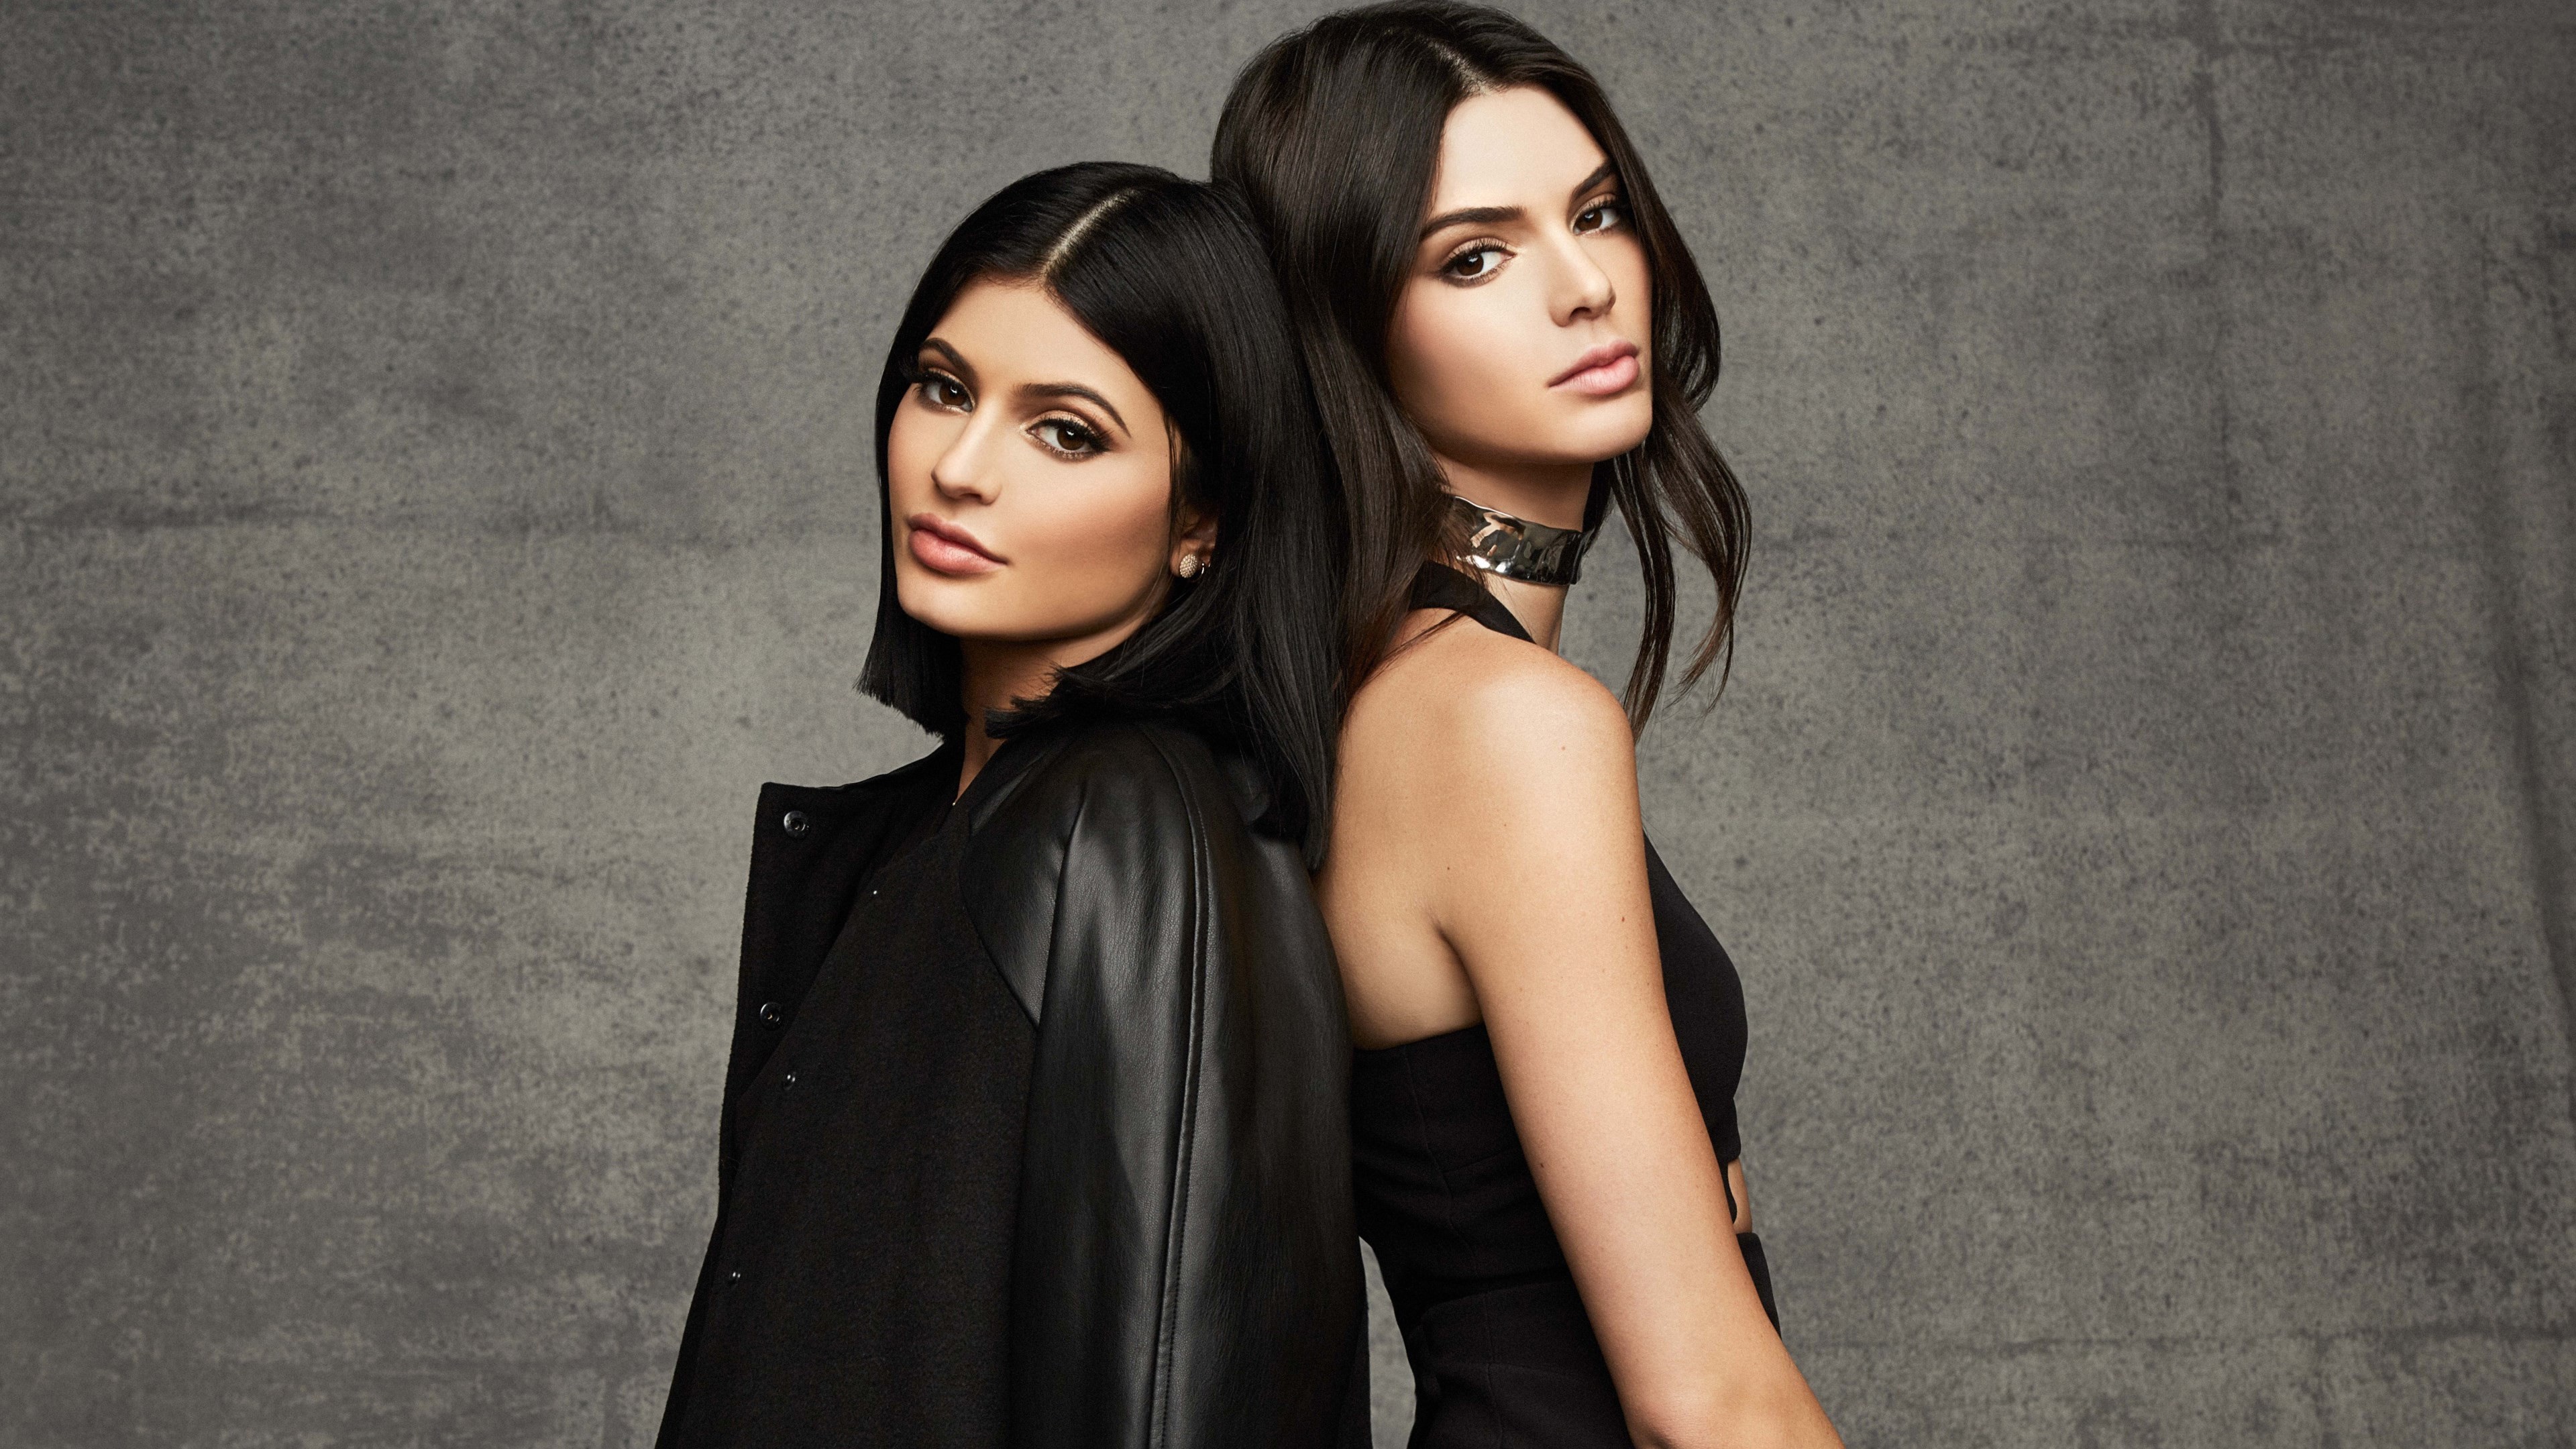 Download This Wallpaper - Kendall And Kylie 2016 , HD Wallpaper & Backgrounds